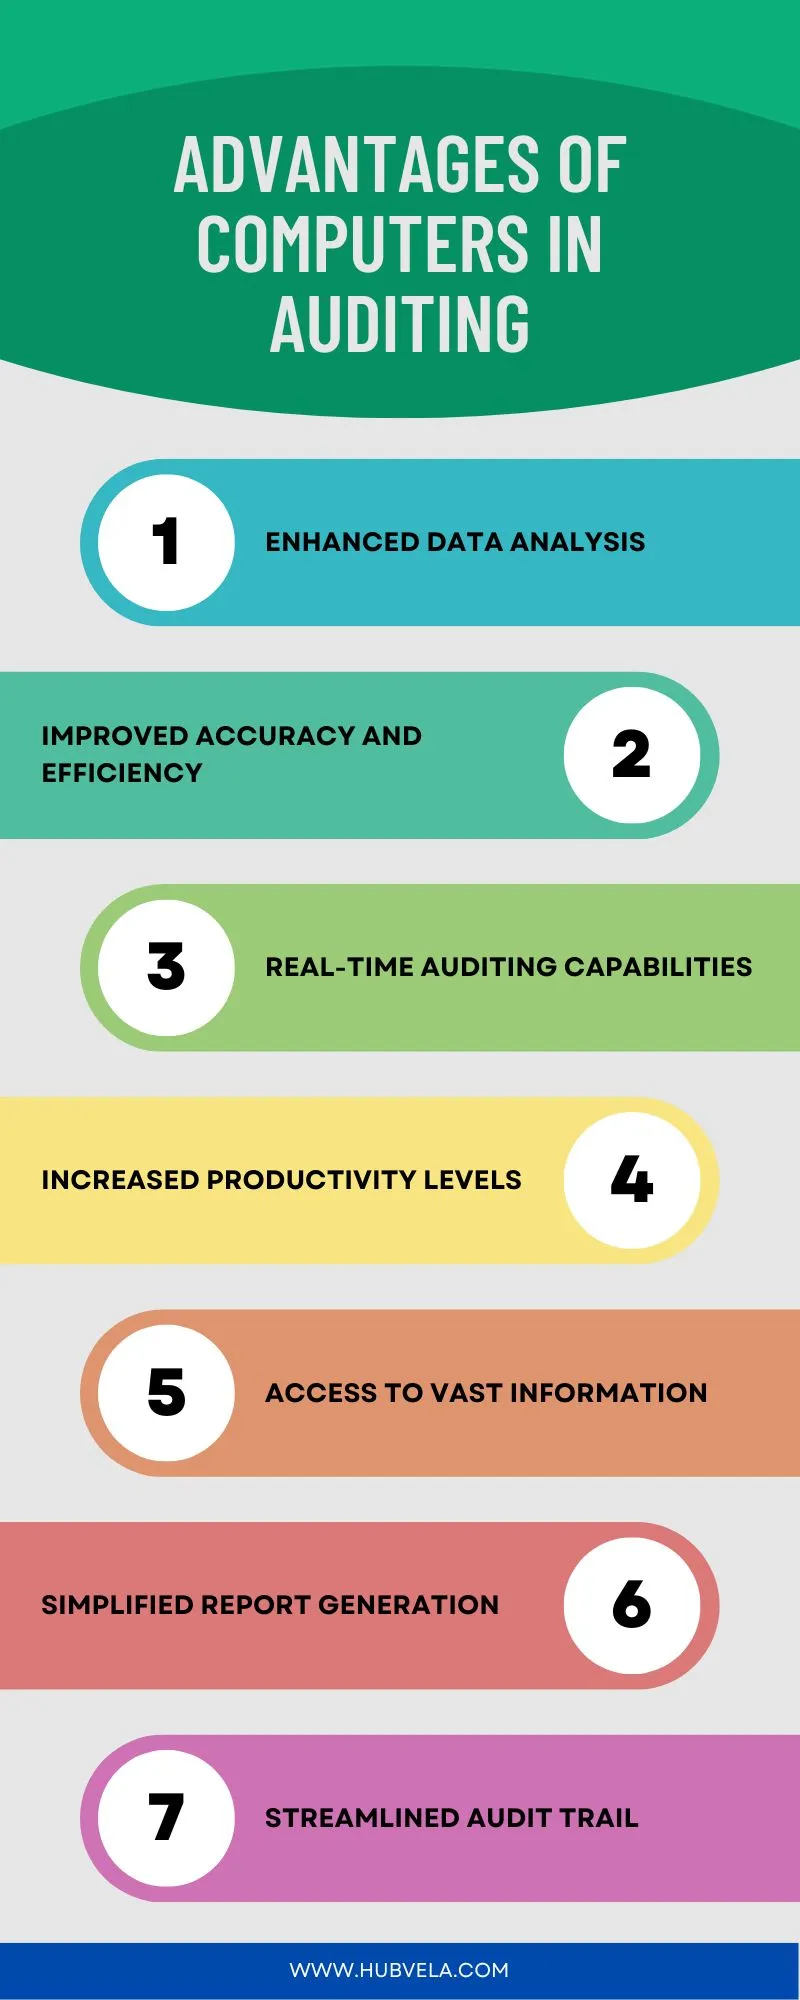 Advantages of Computers in Auditing Infographic